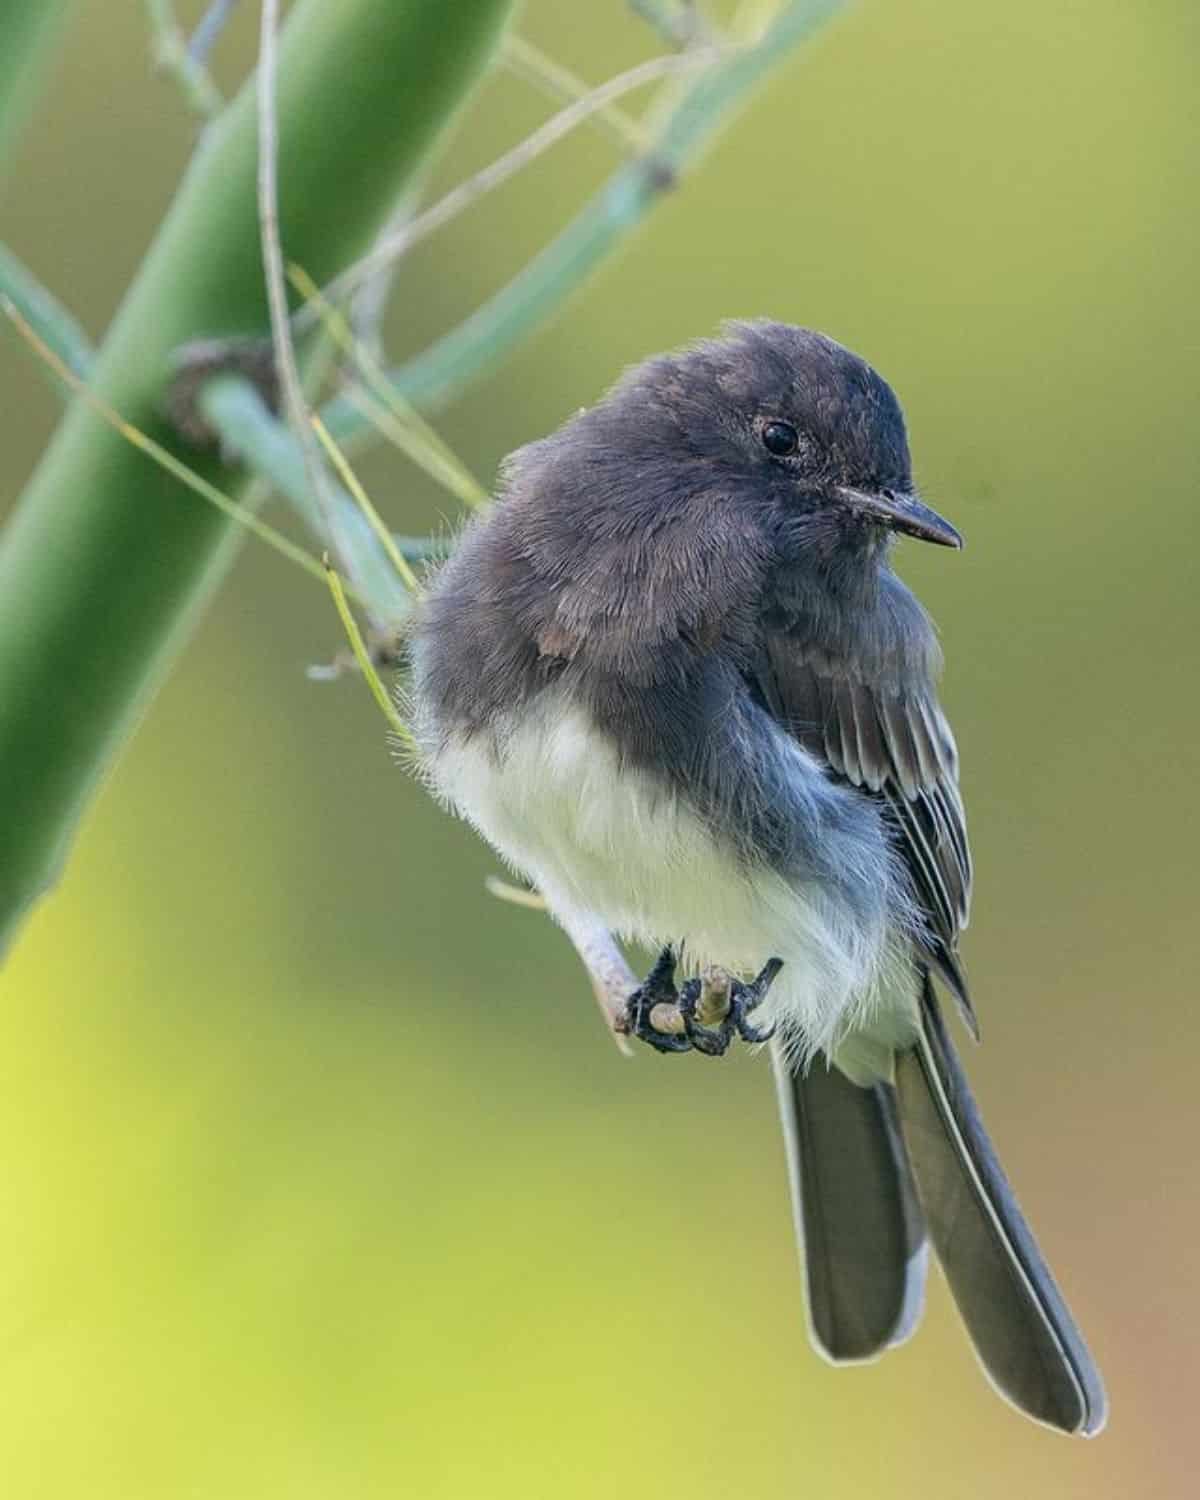 An adorable Black Phoebe perched on a thin branch.